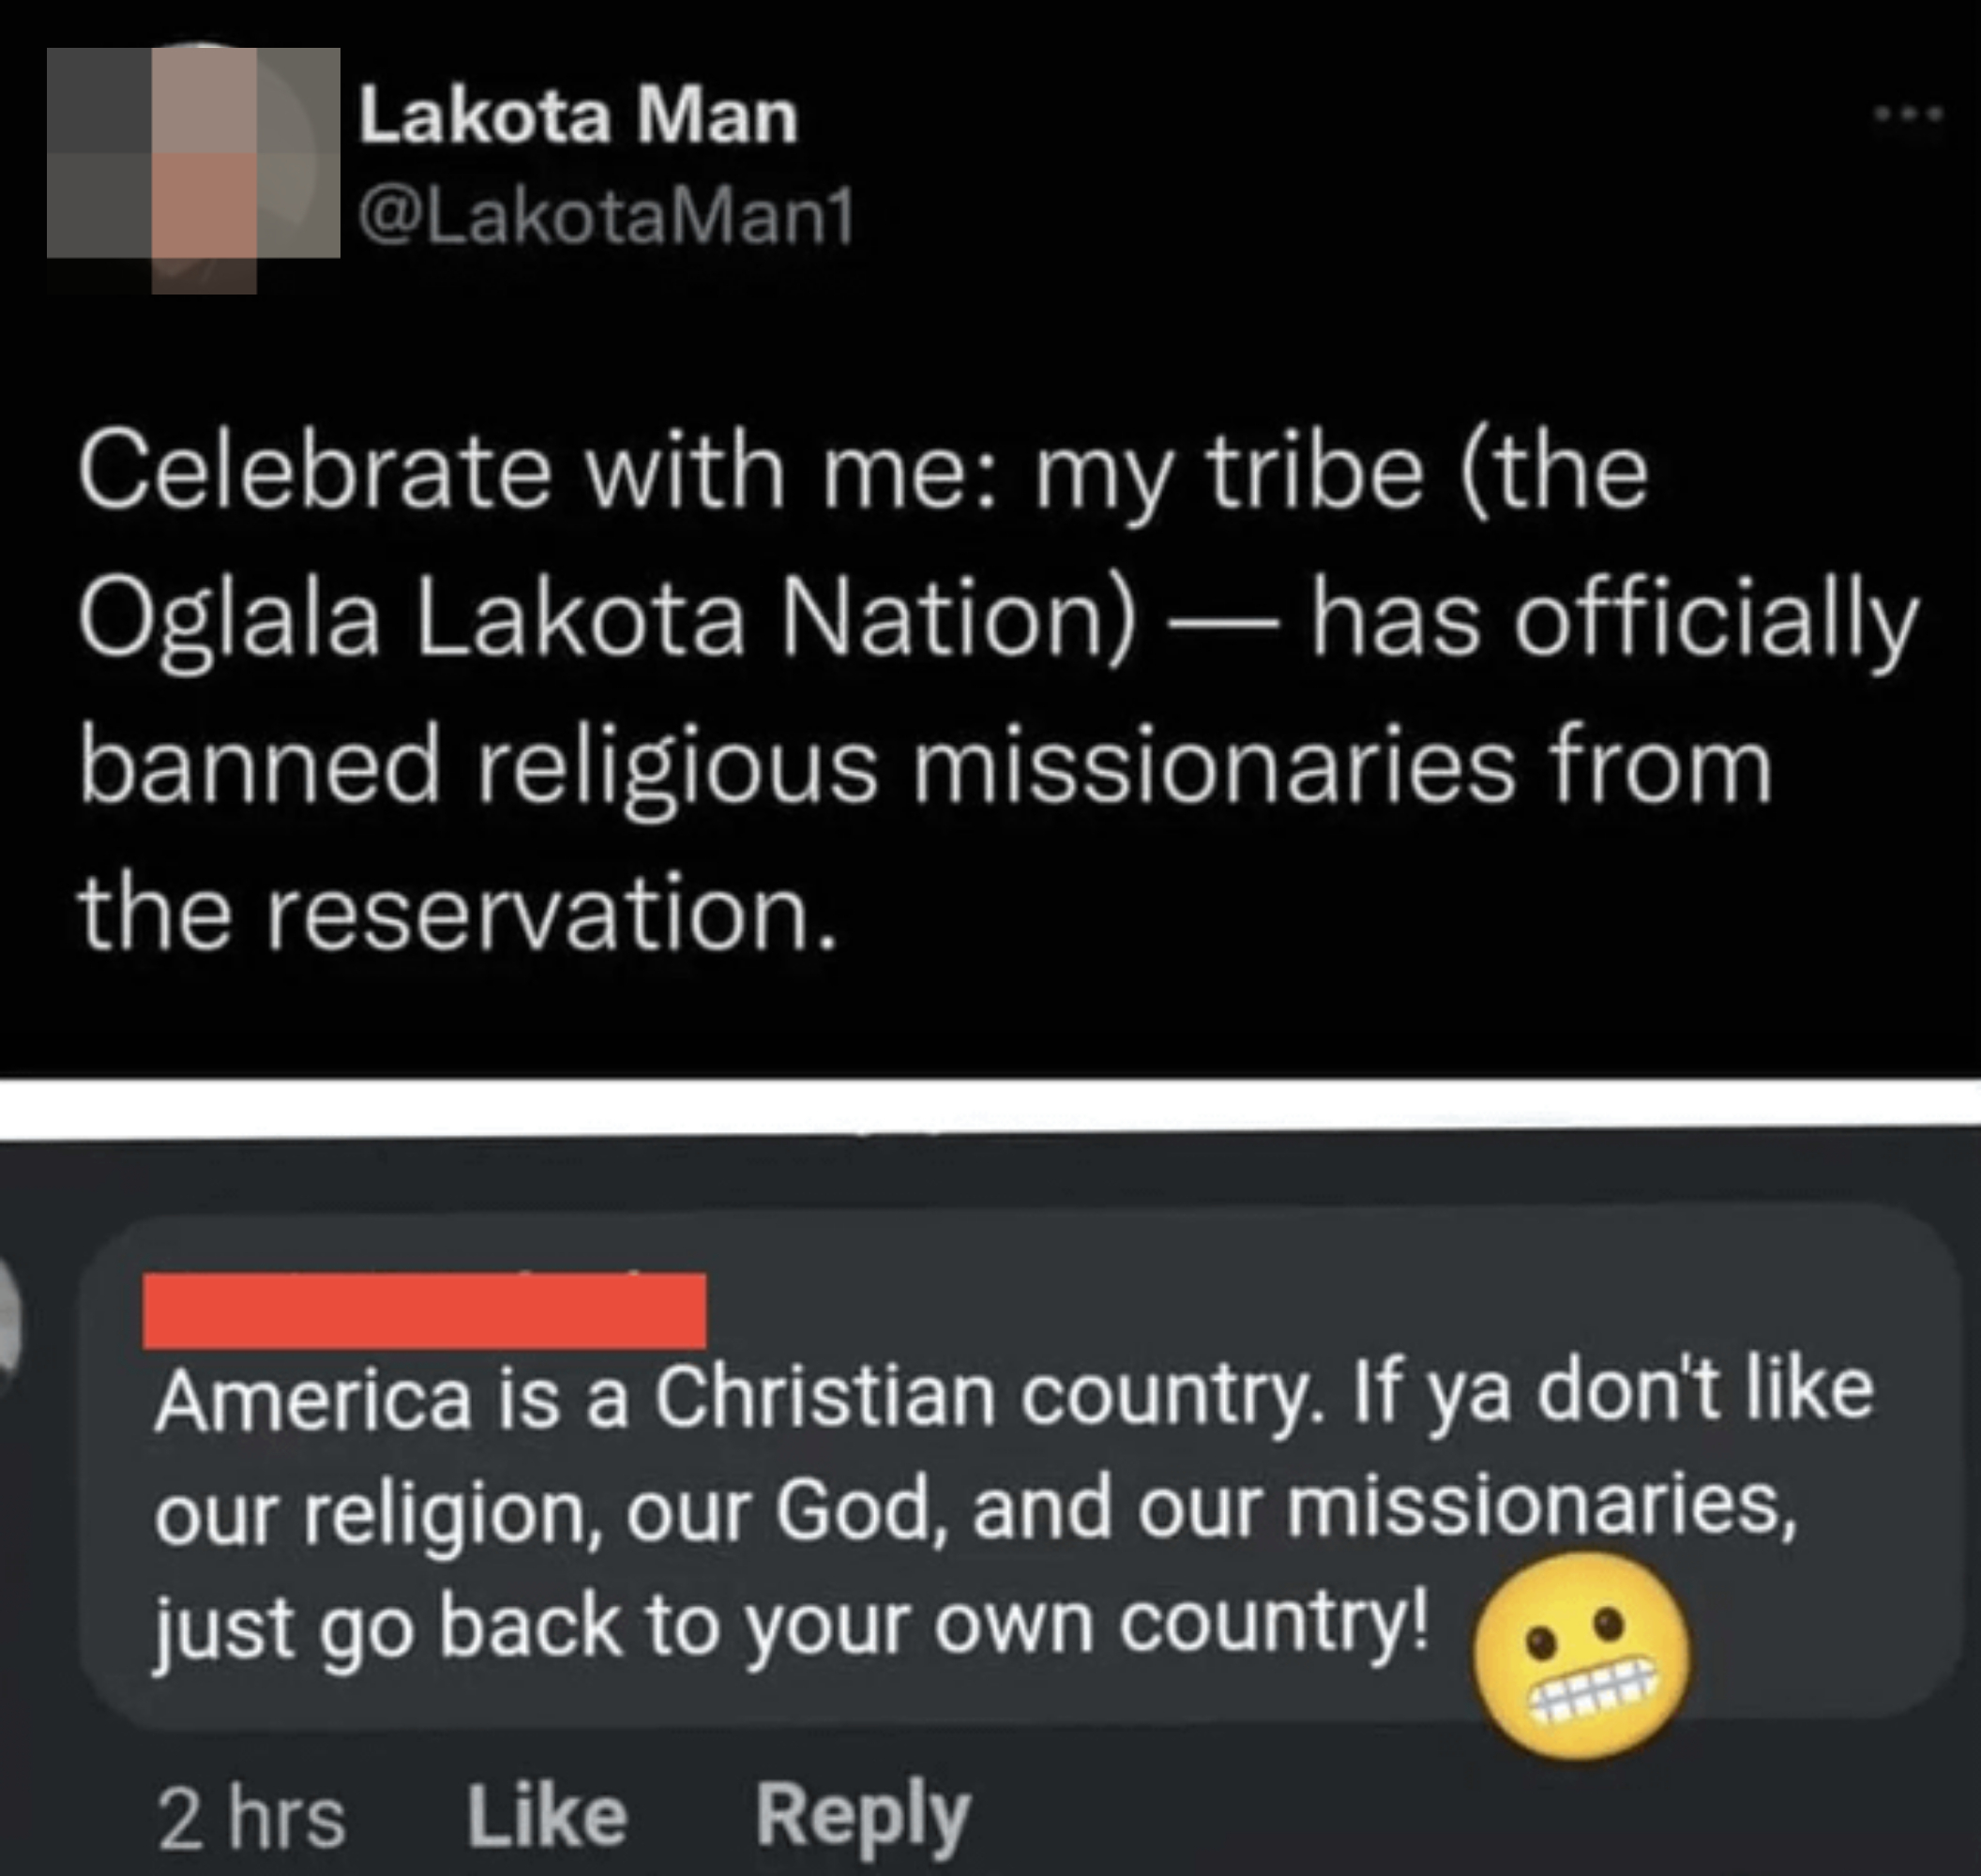 &quot;If ya don&#x27;t like our religion, our God, and our missionaries, just go back to your own country!&quot;